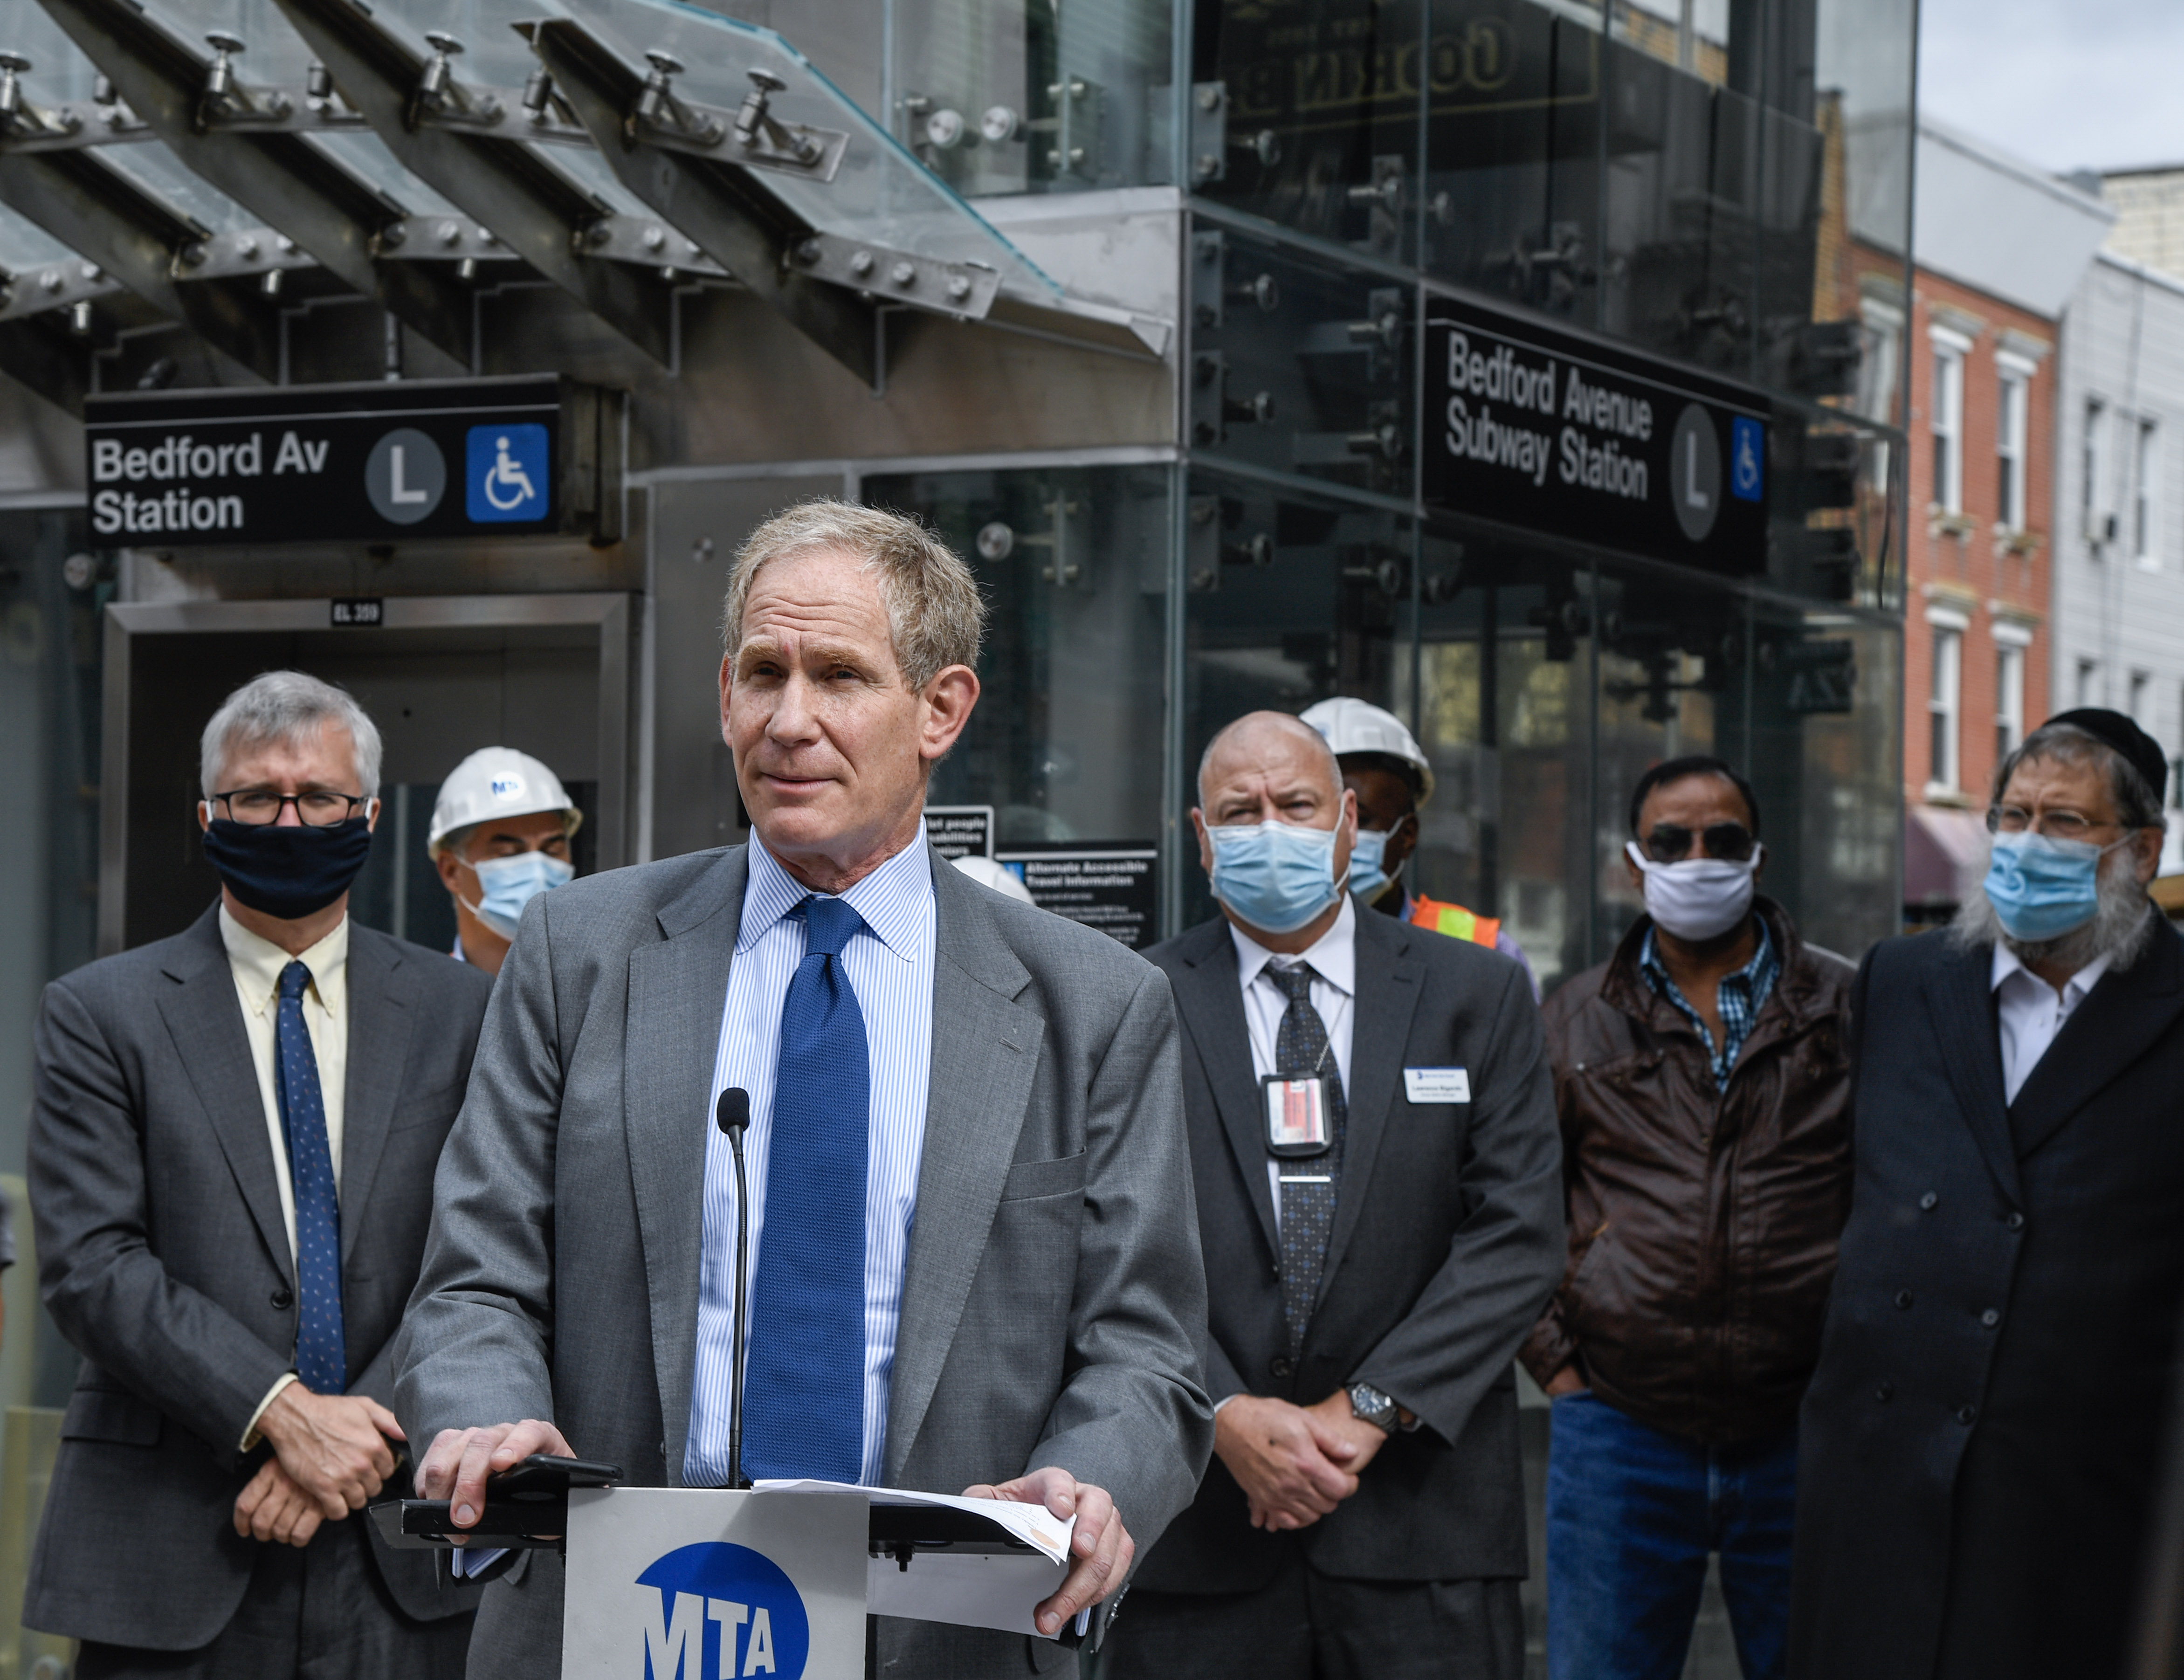 TRANSCRIPT: MTA Acting Chair and CEO Lieber Appears on 1010 WINS' Midday News